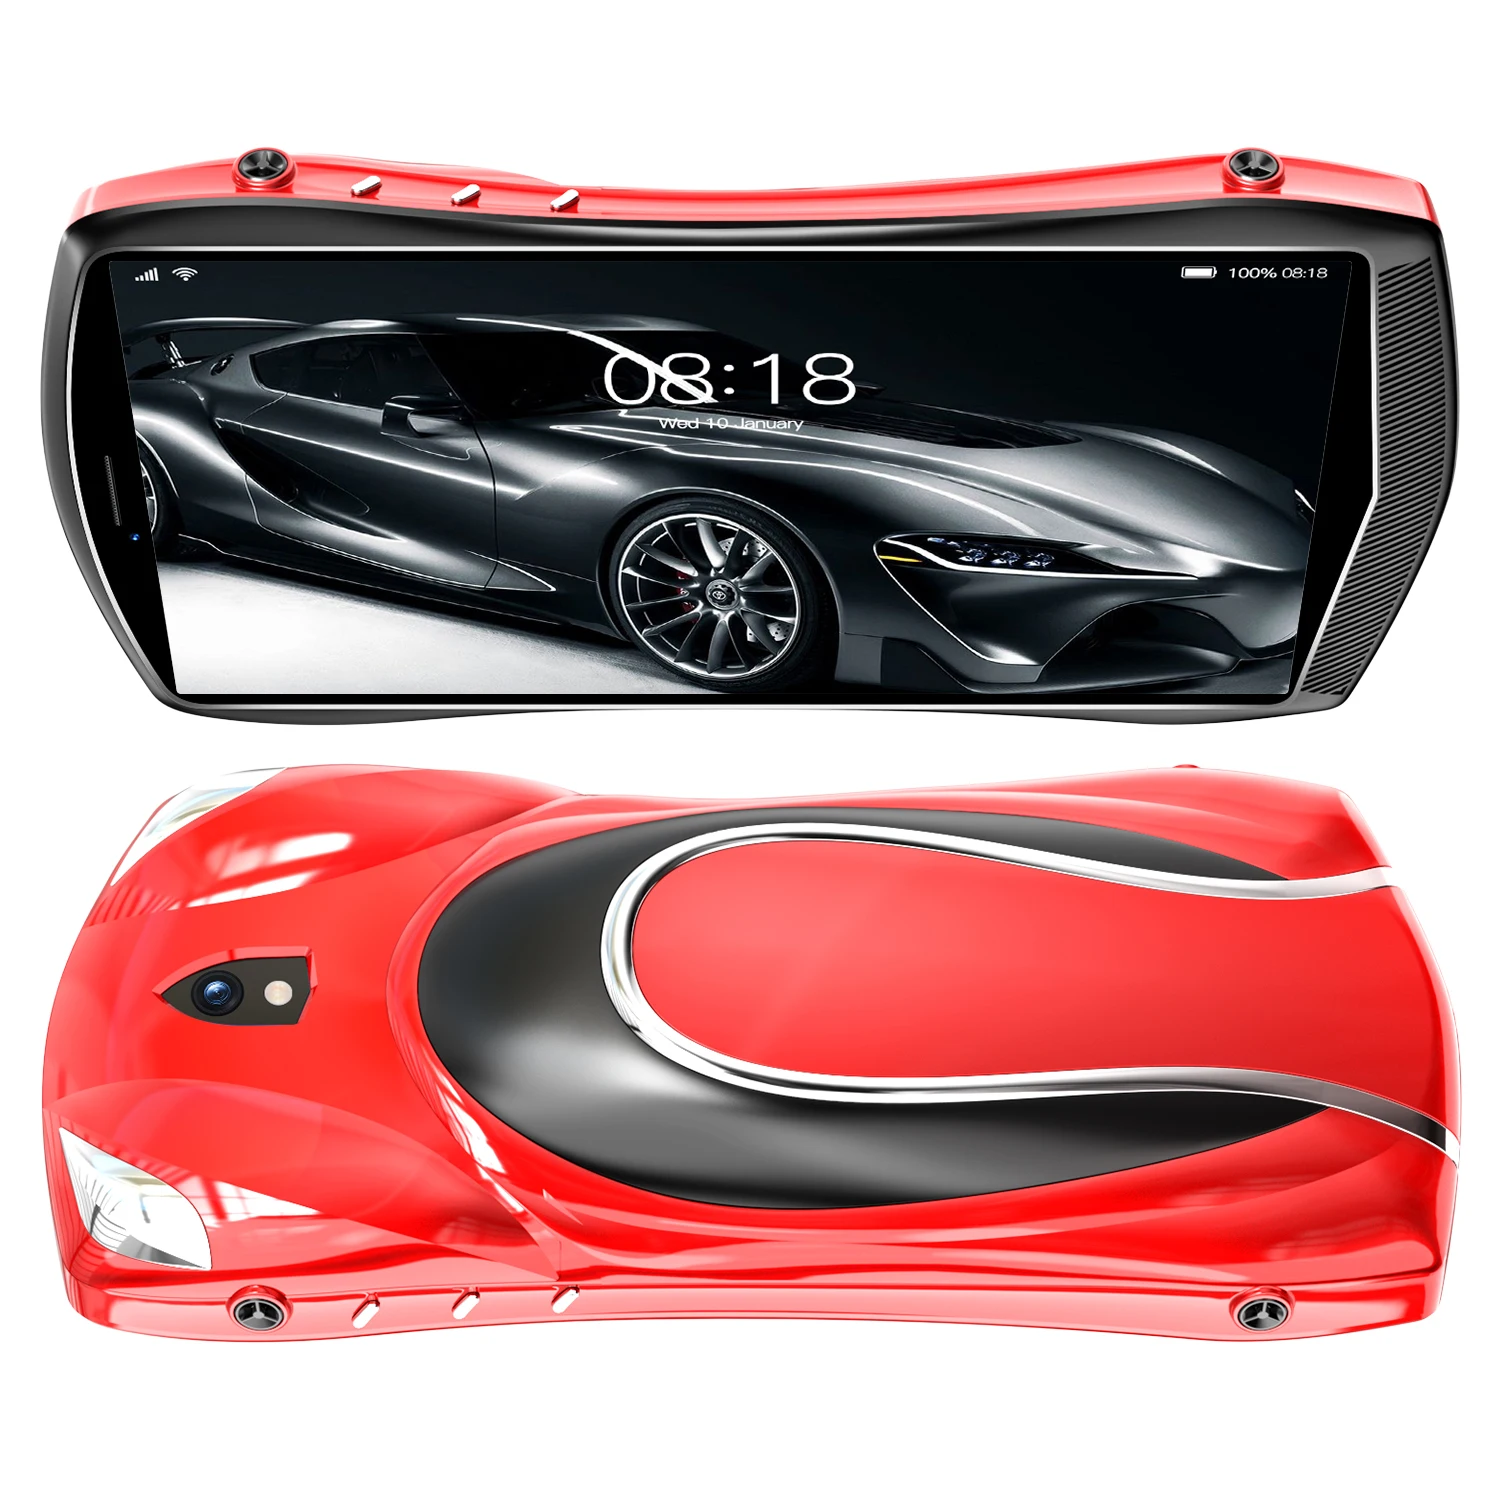 

2022 New Arrival Private mould 9-inch luxury sports car appearance tablet for children